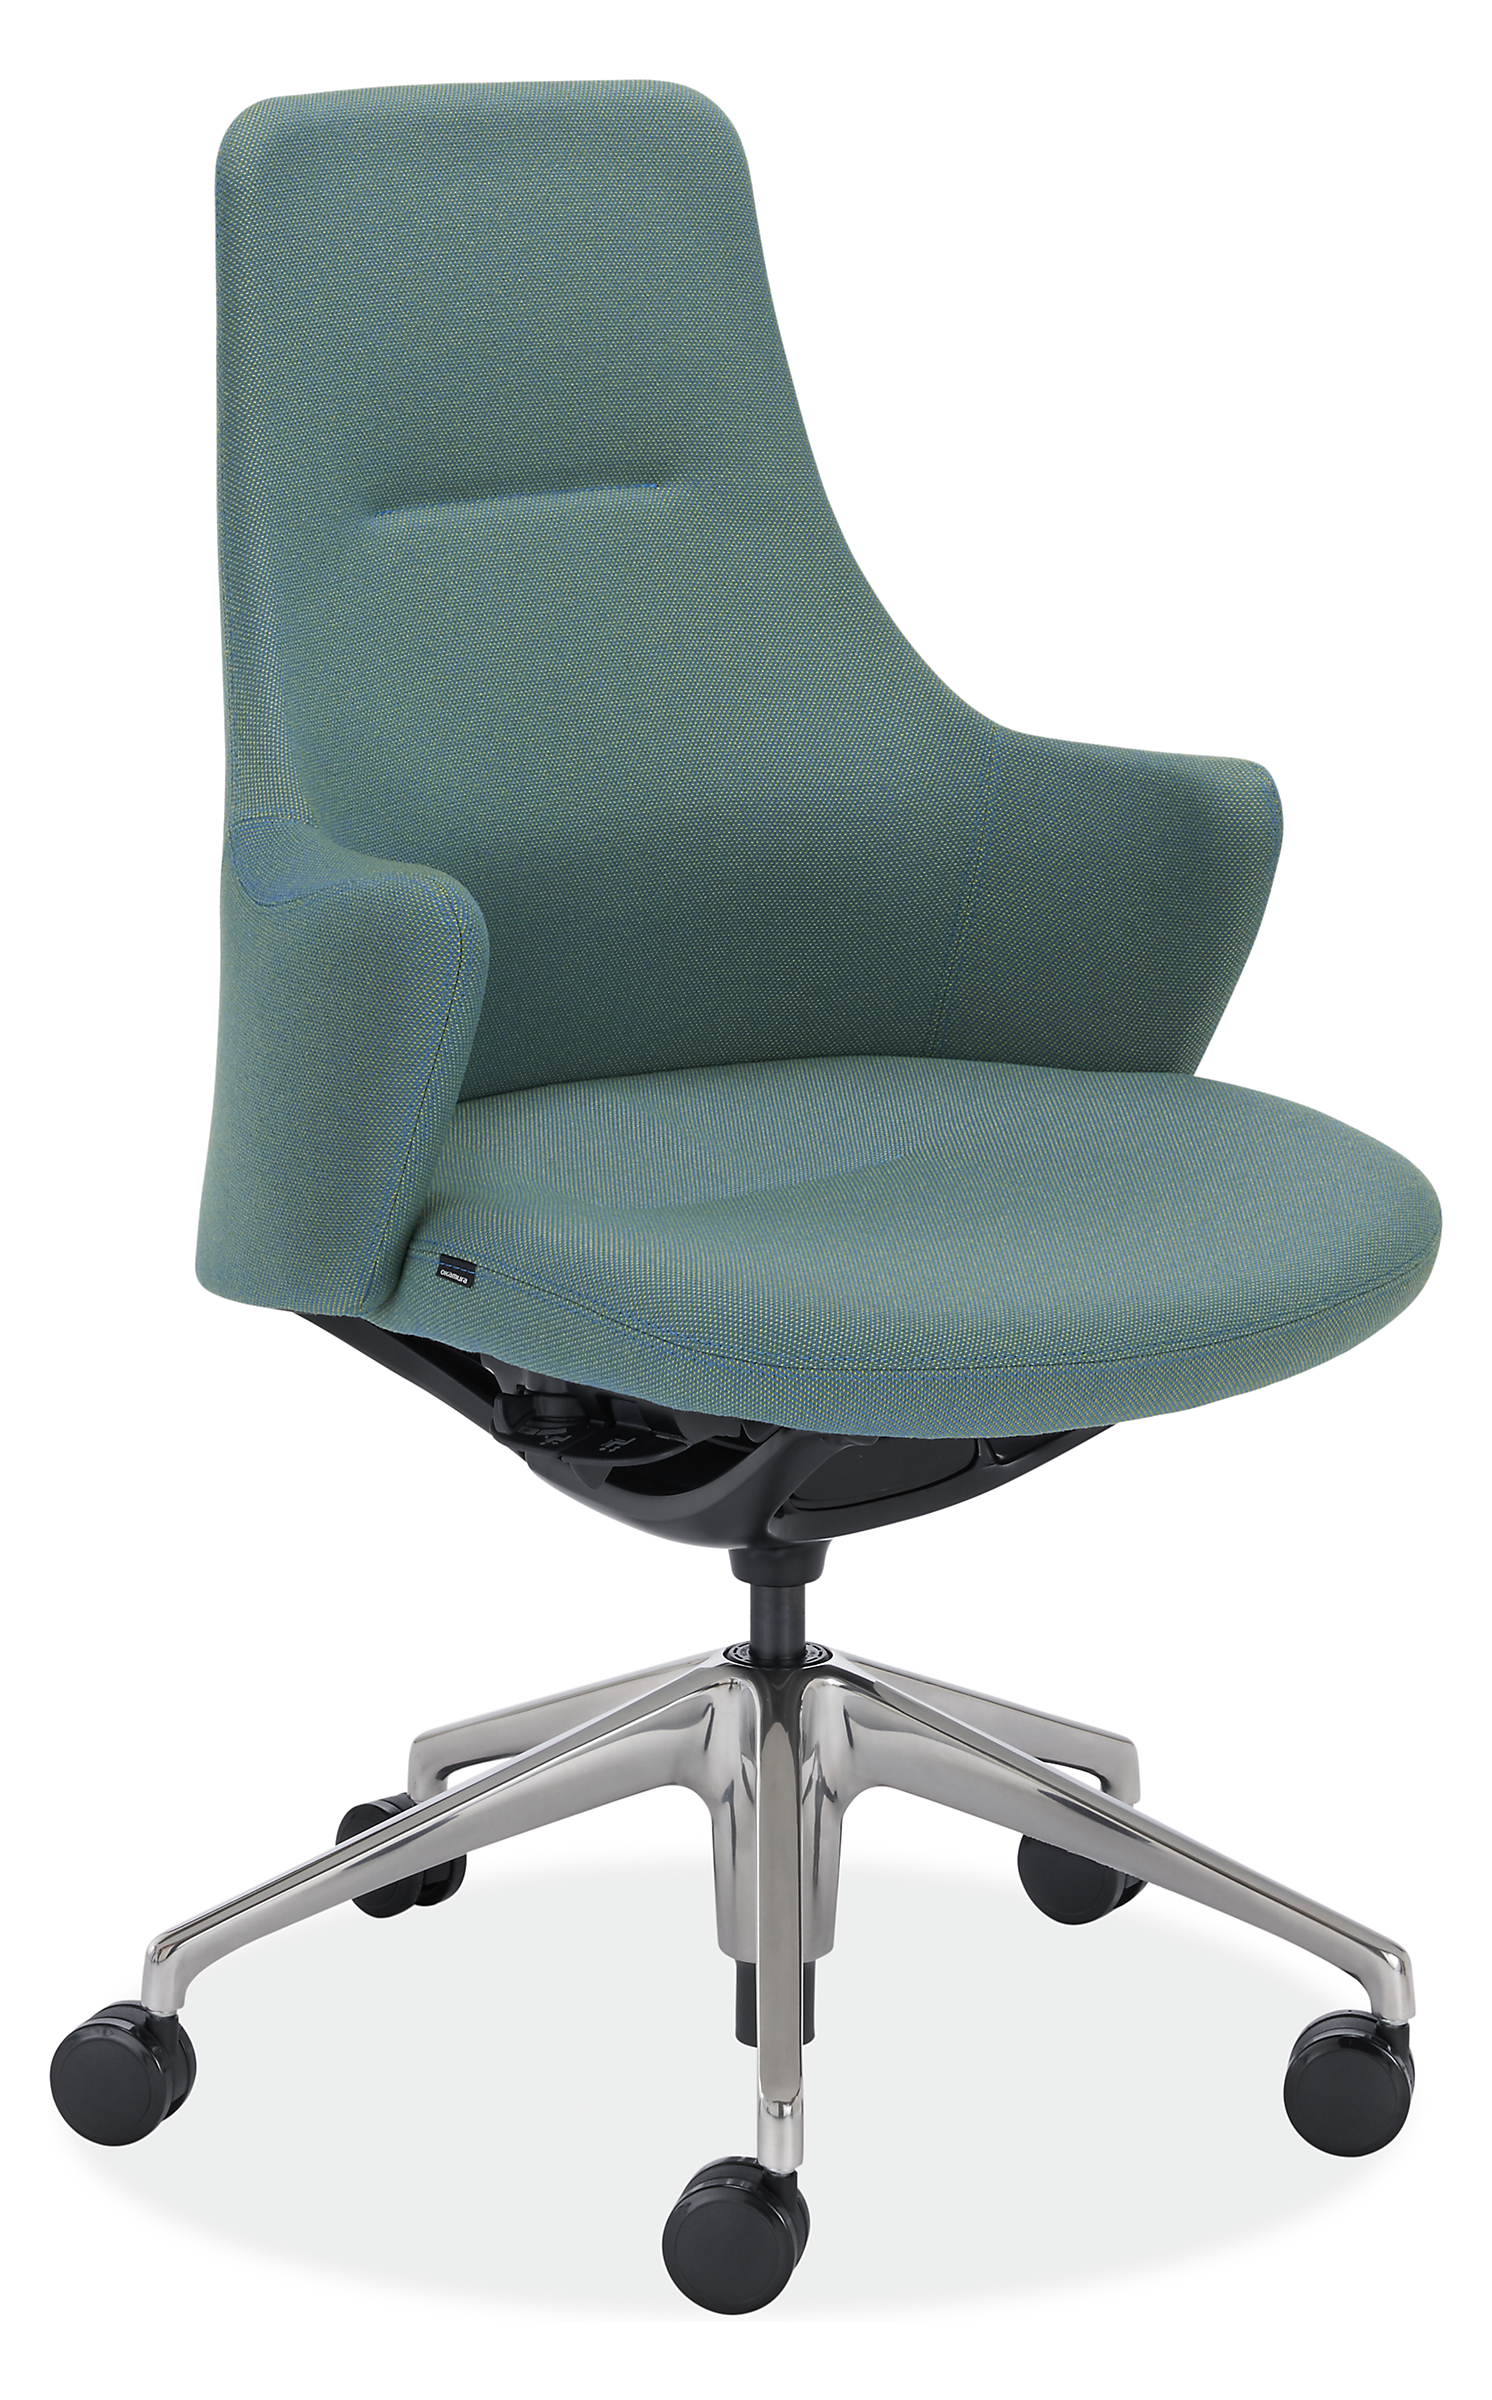 LW Office Chair in Polished Aluminum with Teal Twill Fabric